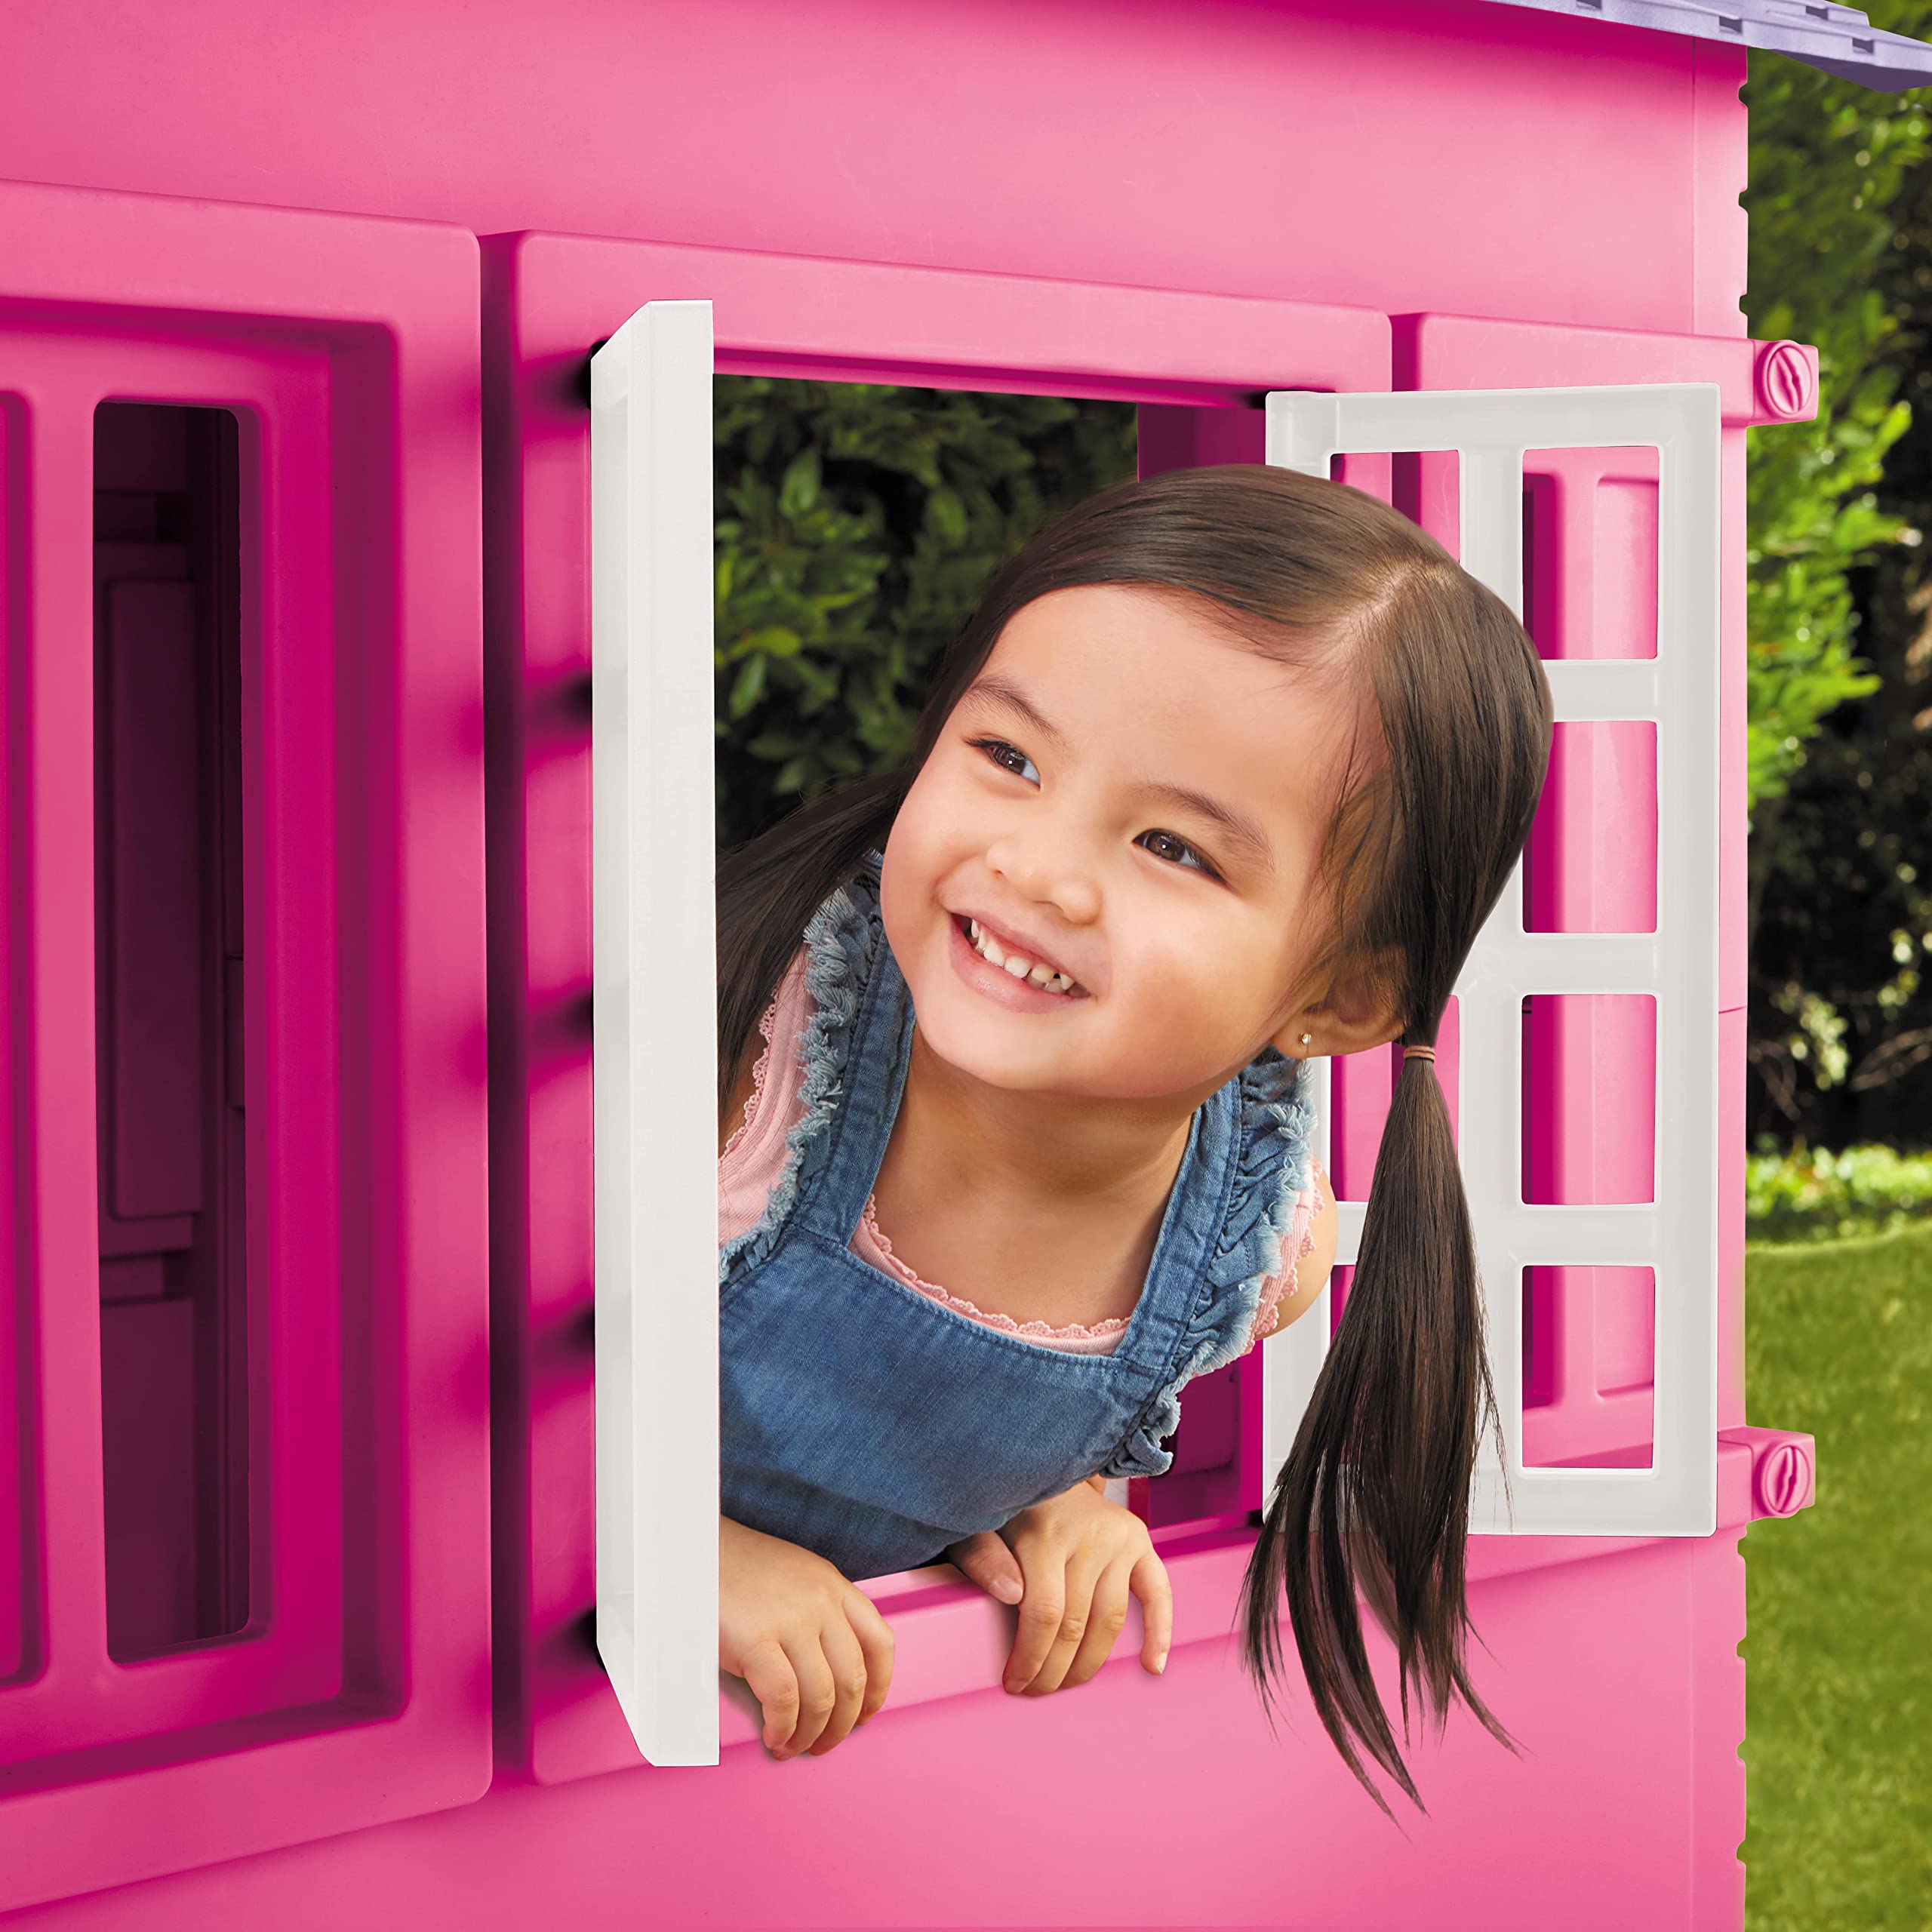 Little Tikes Cape Cottage Pretend Princess Playhousefor Kids, Indoor Outdoor, with Working Doors and Windows, for Toddlers Ages 2+ Years,Pink,Large